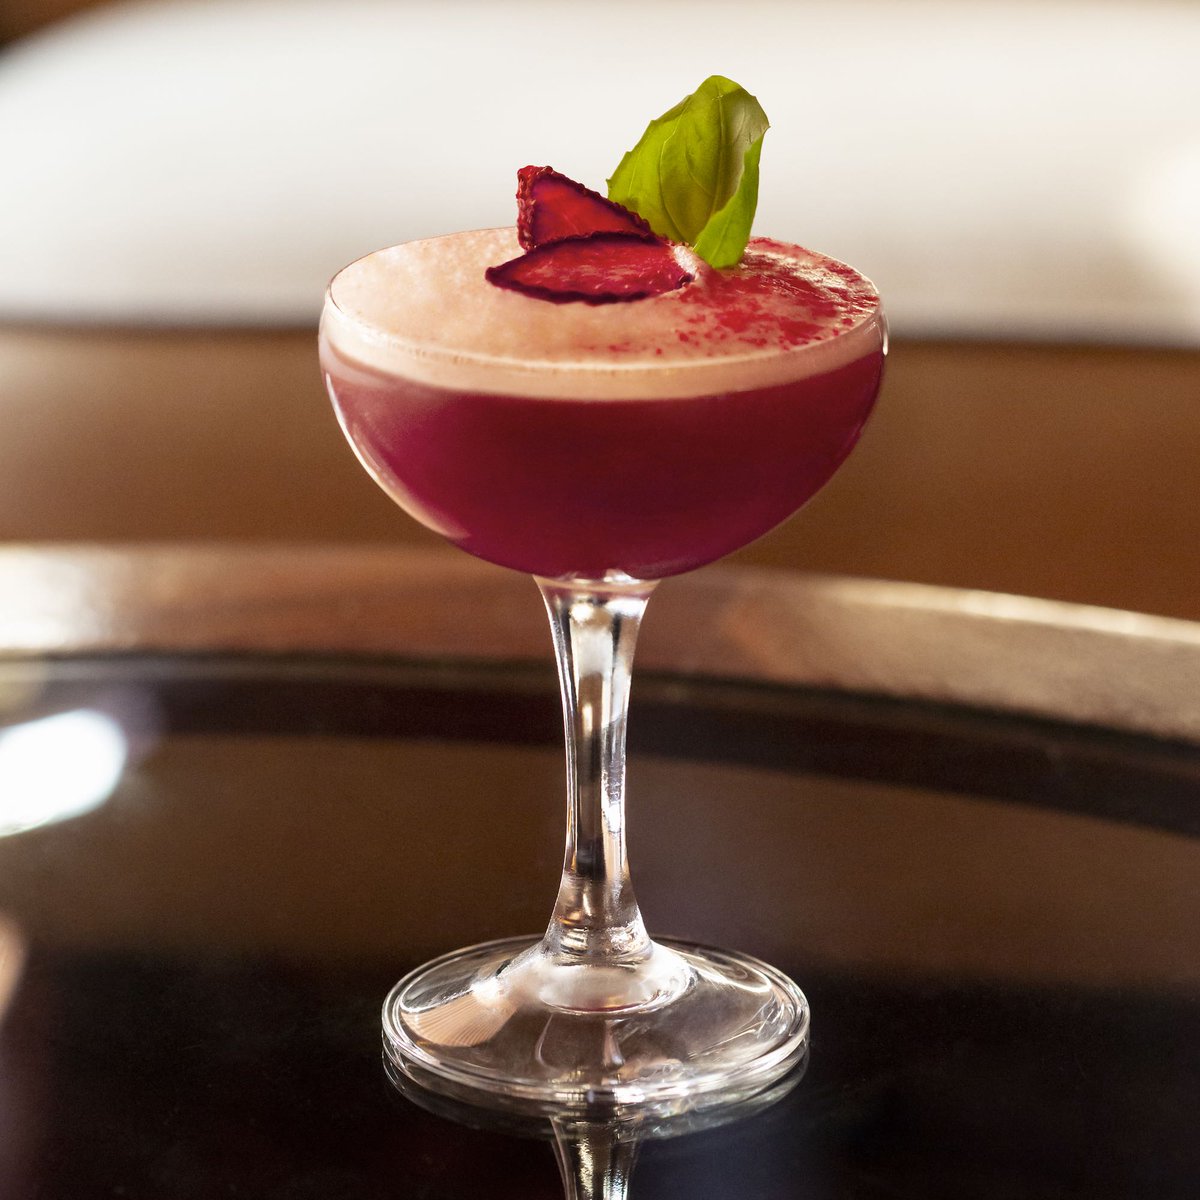 We think it might be time for a Fontaine's Club, don't you? 💋
Made with @ginmare , lemon, strawberry puree, basil and egg white, because it's important to hit one of your 5-a-day (5 gins of course) #gin #ginmare #fontainesbar #saturday #cocktail #pink #strawberry #5aday #dalston